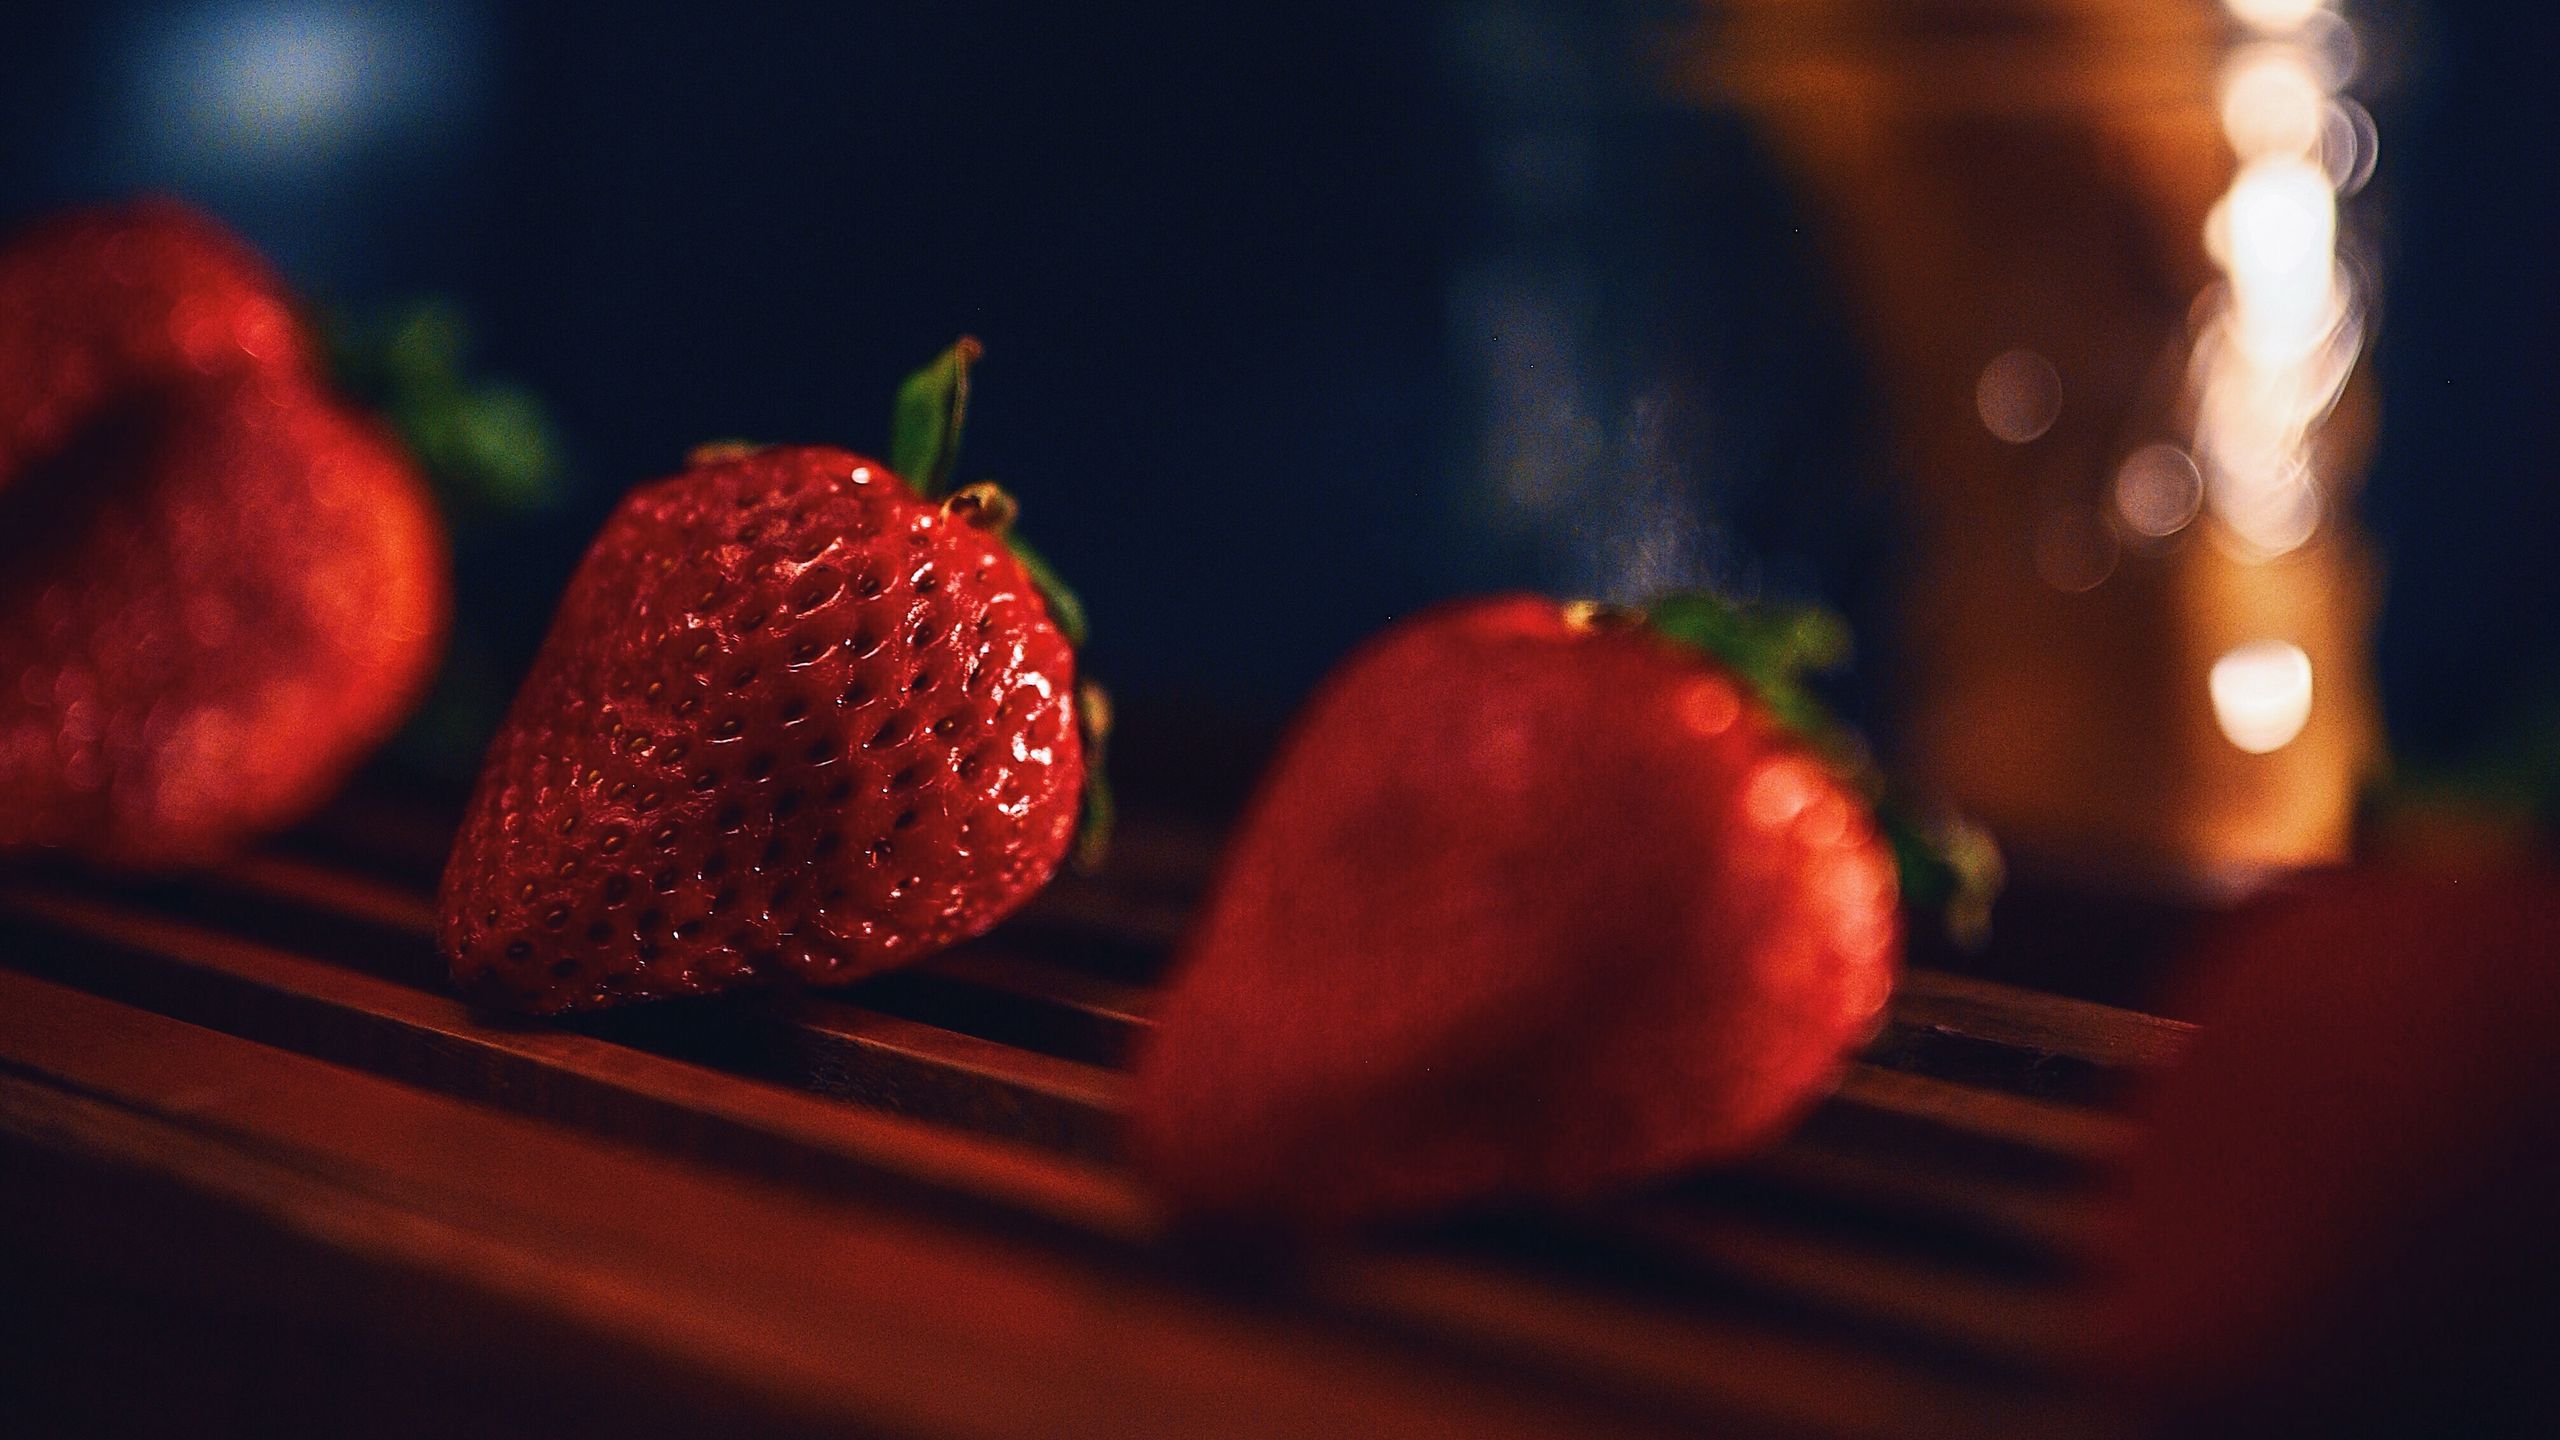 Download Wallpaper 2560x1440 Strawberry Berries Ripe Red Juicy Widescreen 169 Hd Background 4503